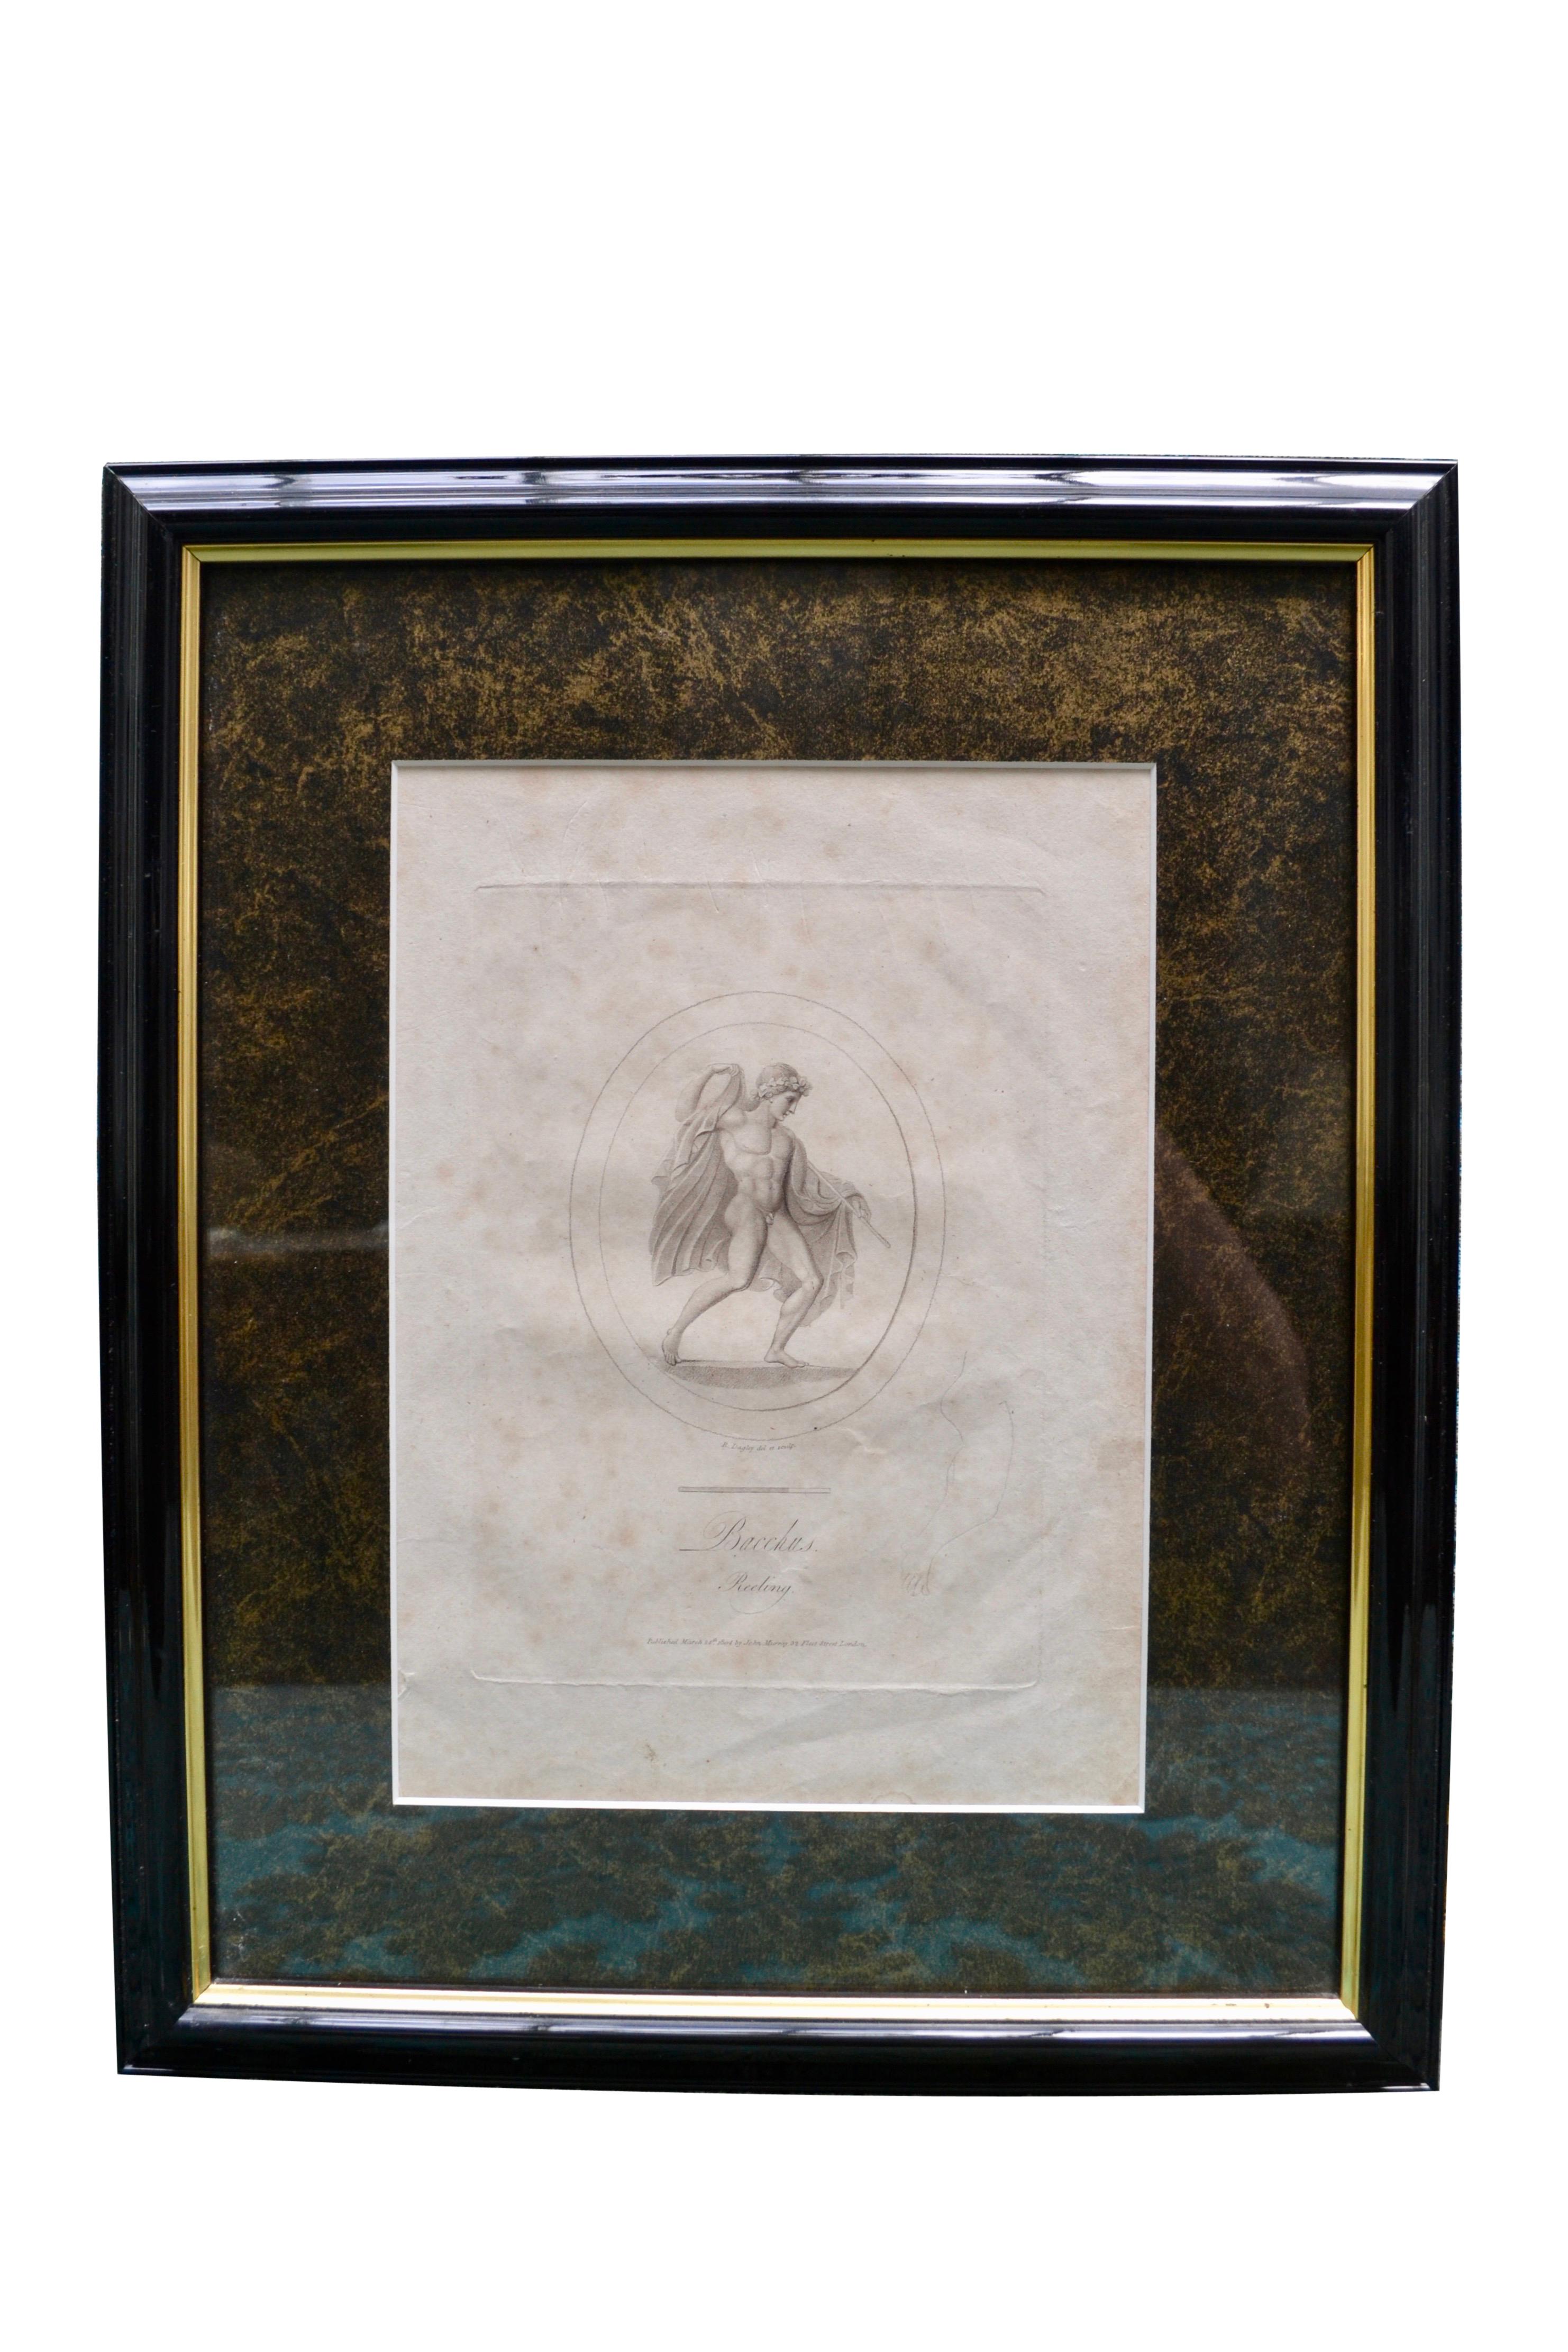 Parchment Paper Eight 19 Century Neoclassical English Engravings by Richard Dagley For Sale